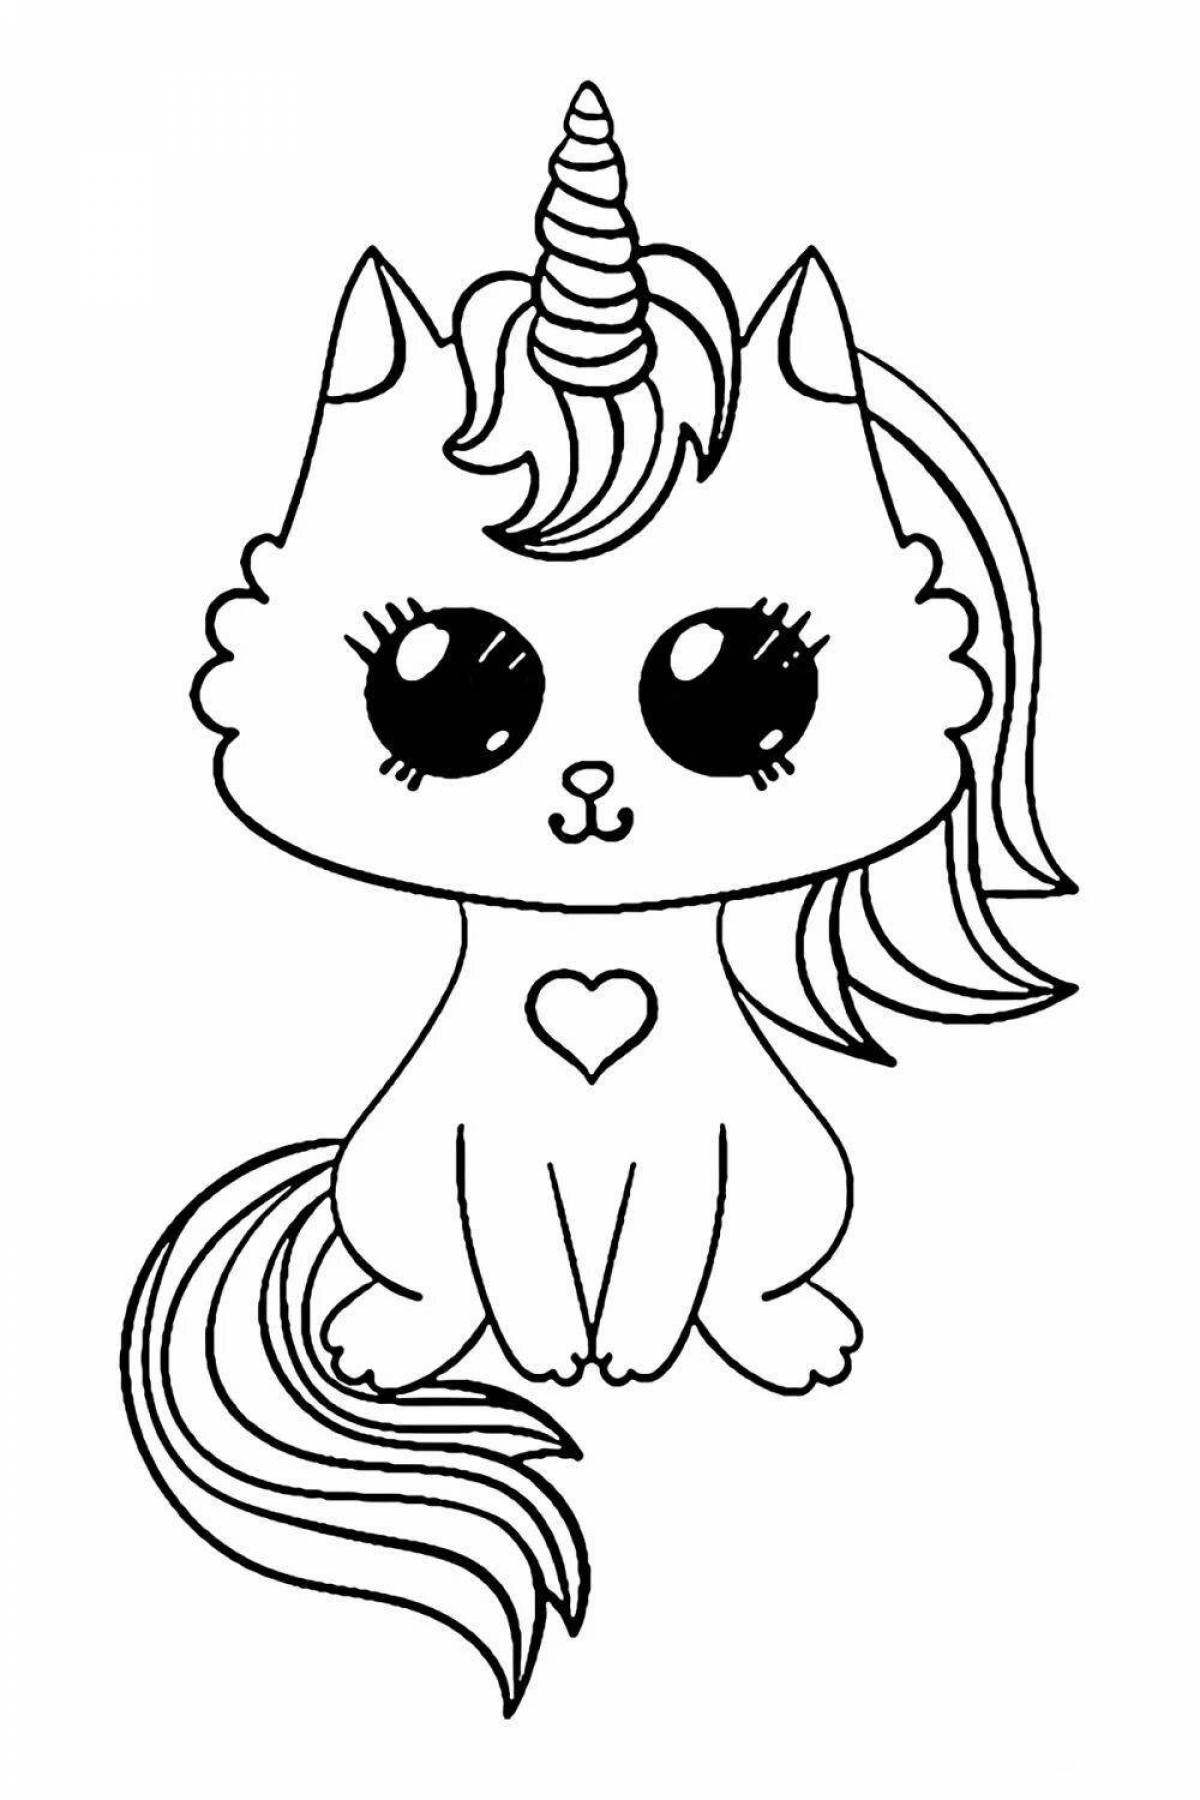 Serene coloring page unicorn picture for kids